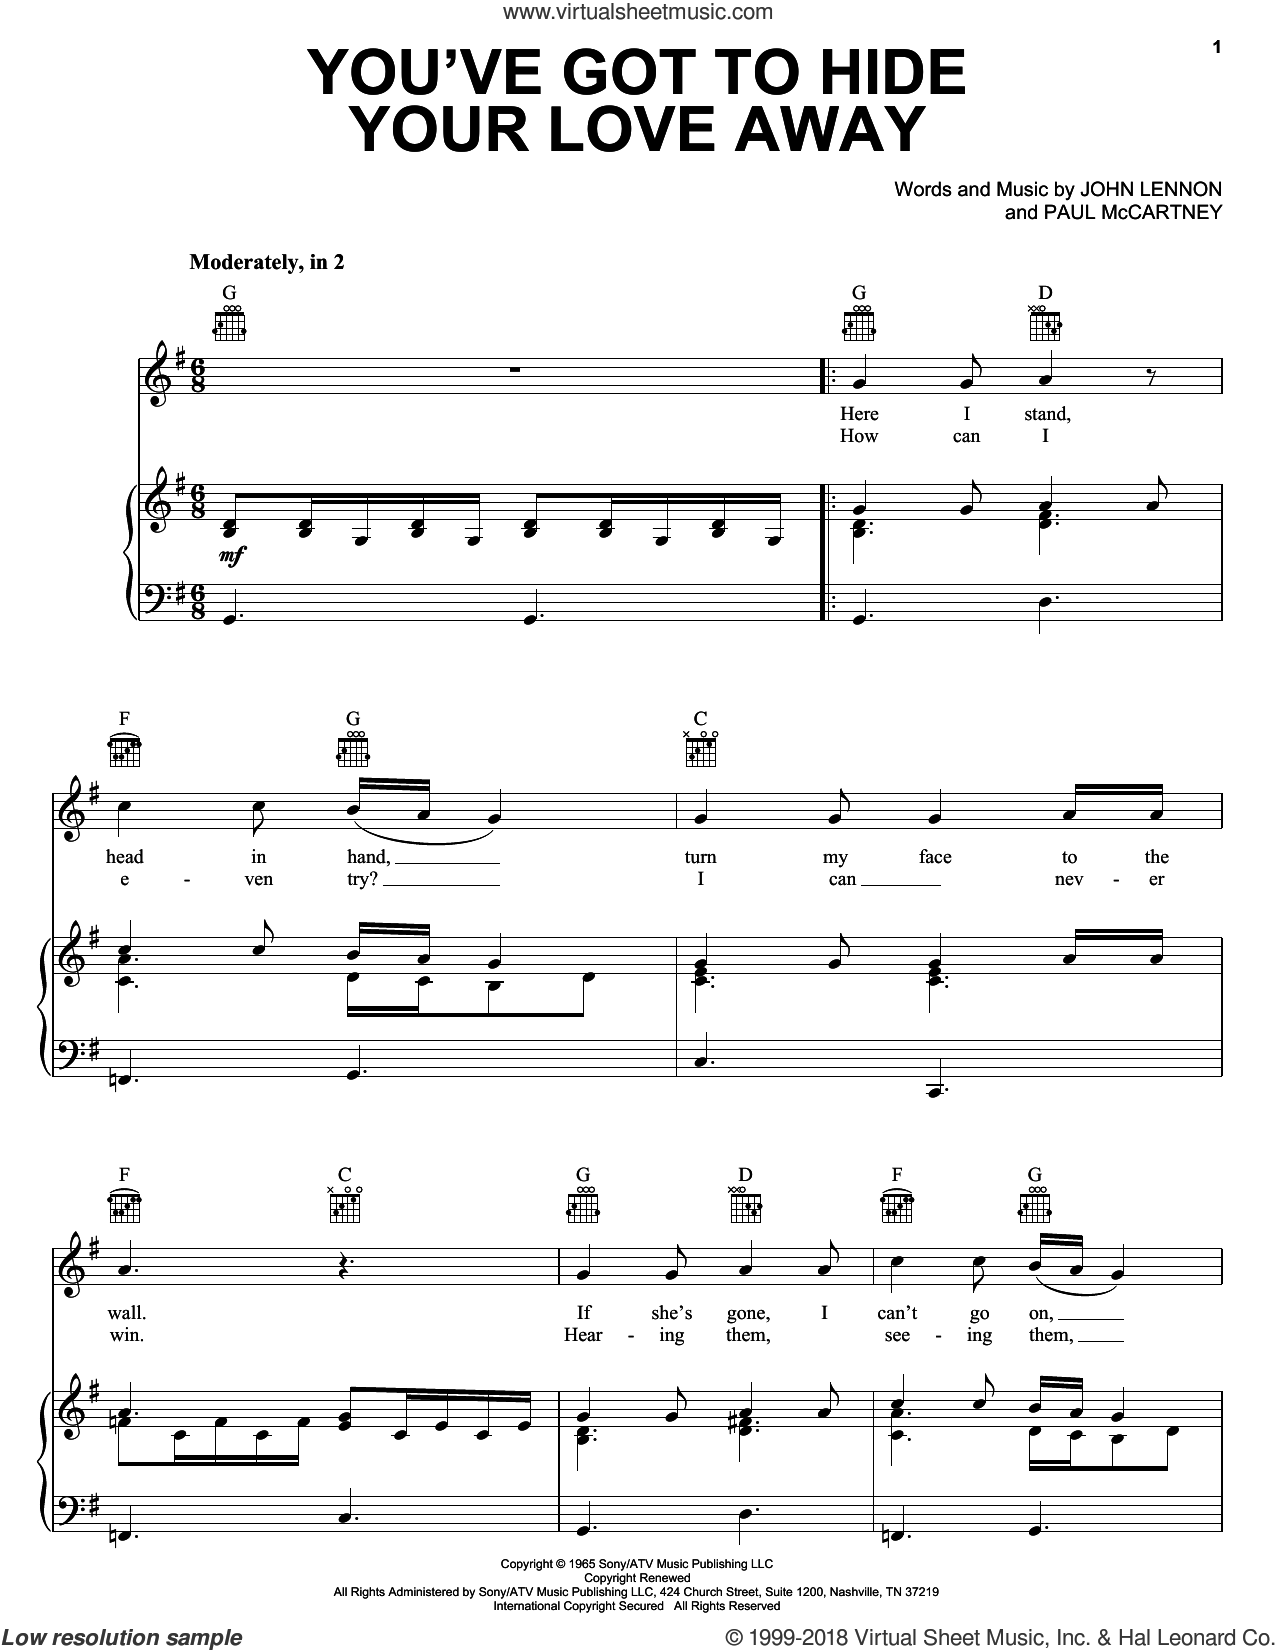 https://cdn3.virtualsheetmusic.com/images/first_pages/HL/HL-7366First_BIG.png